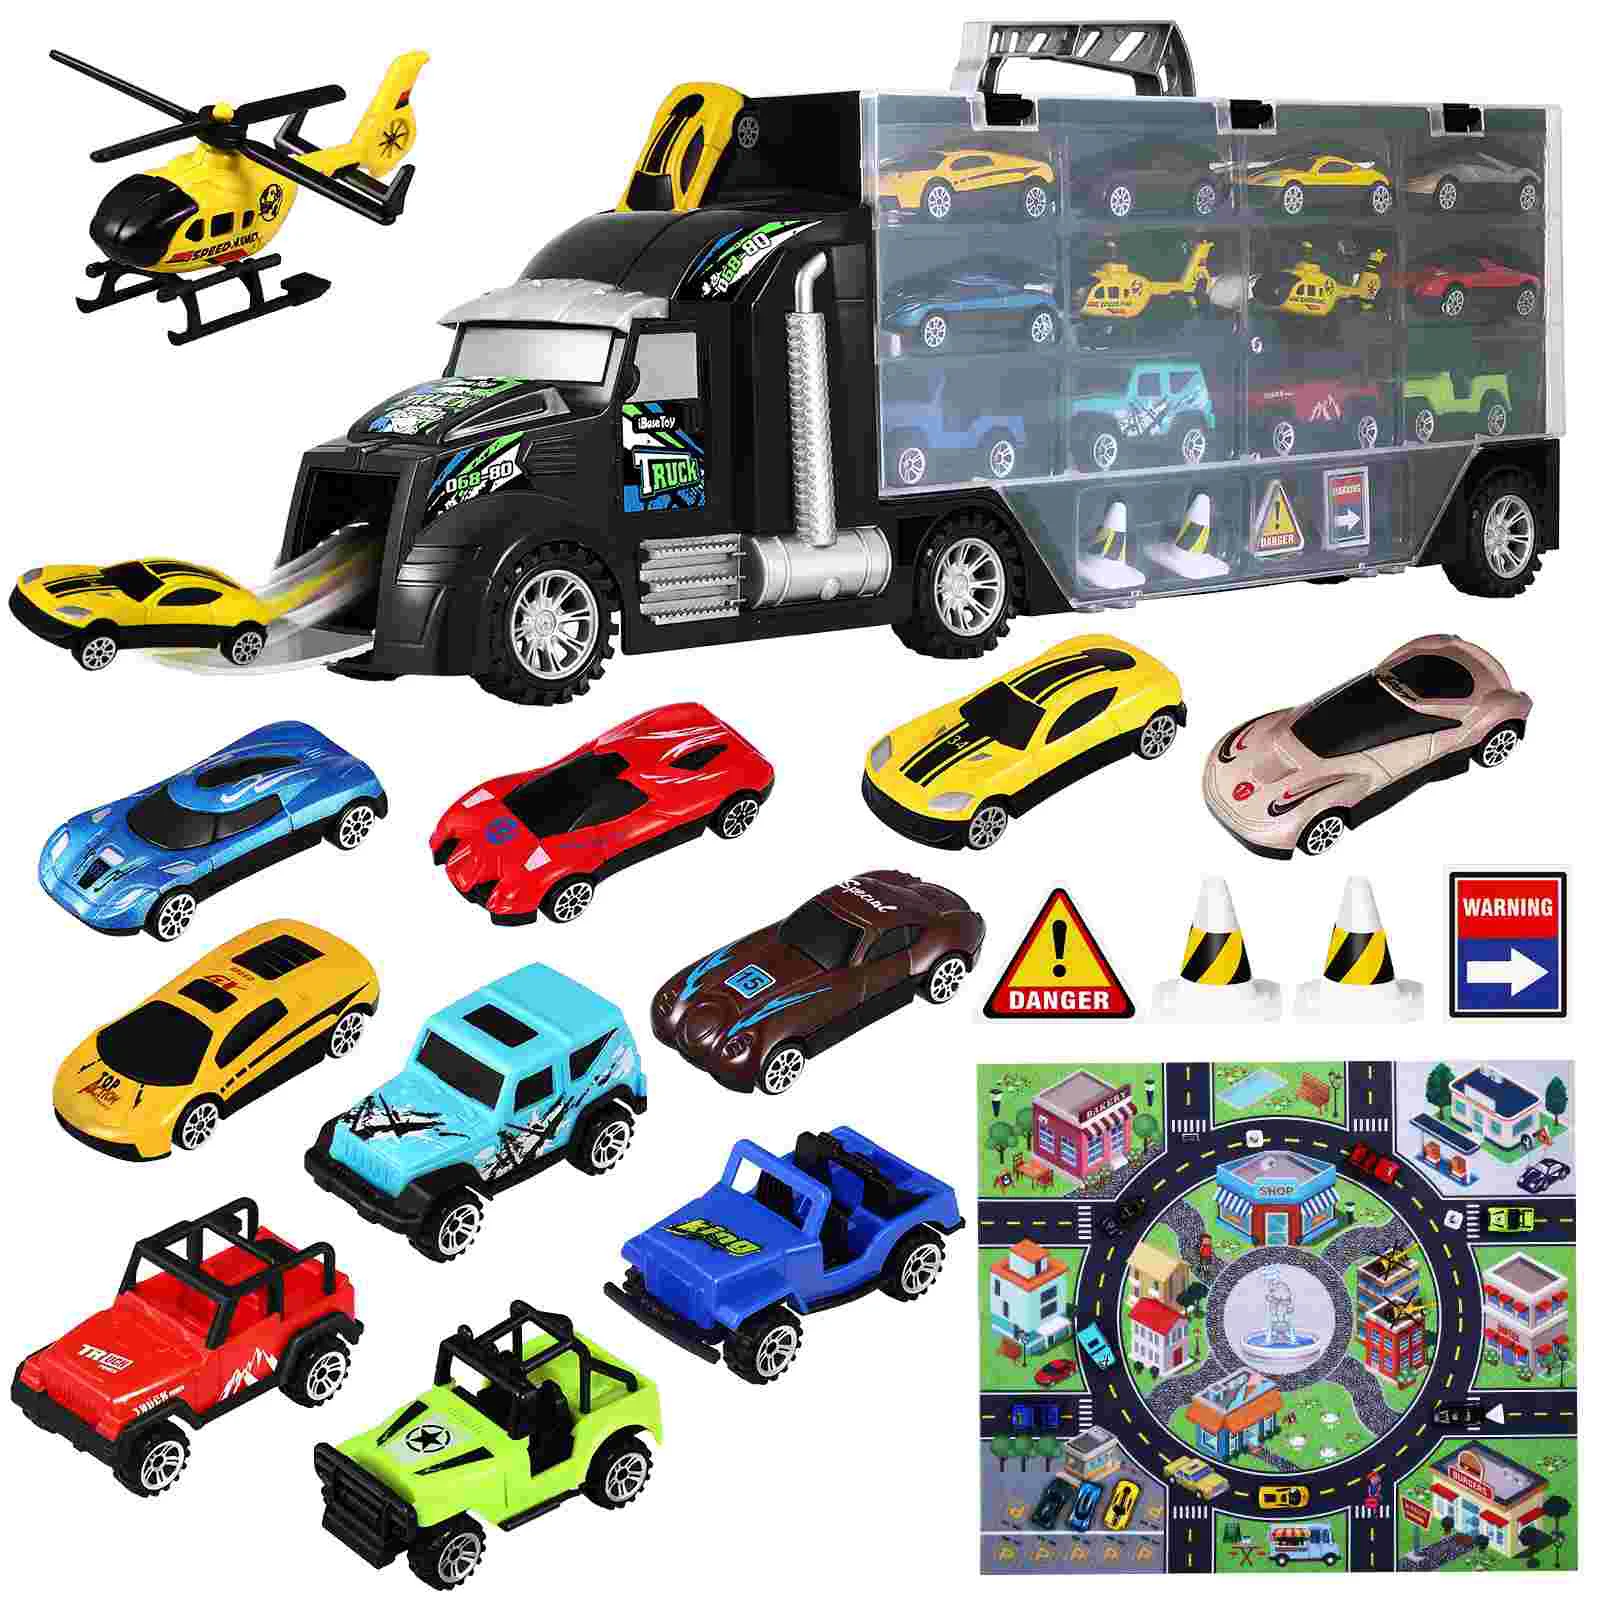 

iBaseToy Kids Carrier Truck Toy Set Small Vehicles Helicopters Transport Truck Children Model Car Kit for Gift Party Favors